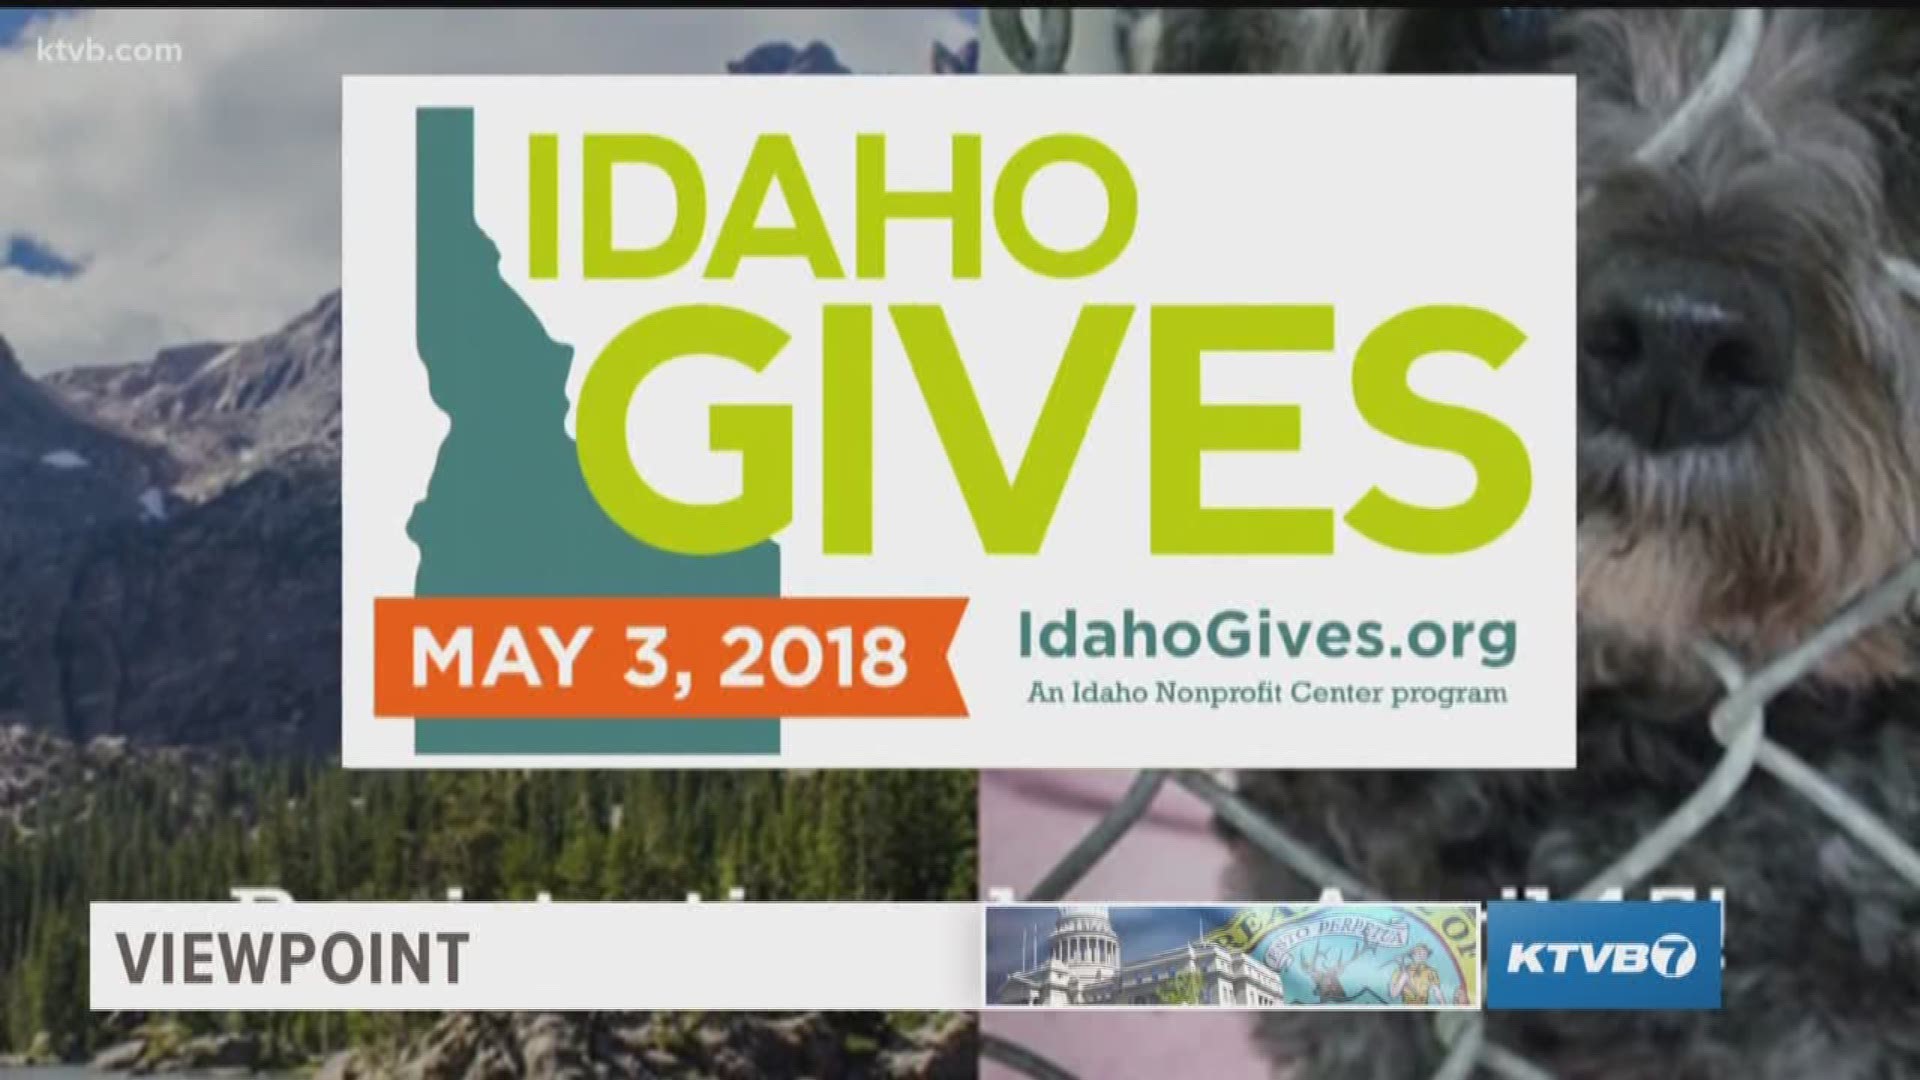 Idaho's single largest day of giving is Thursday May 3. On Viewpoint on KTVB, Doug Petcash talks with Idaho Nonprofit Center Pres./CEO Amy Little about how Idaho Gives started six years ago, how you can make a donation and what percentage of your donation